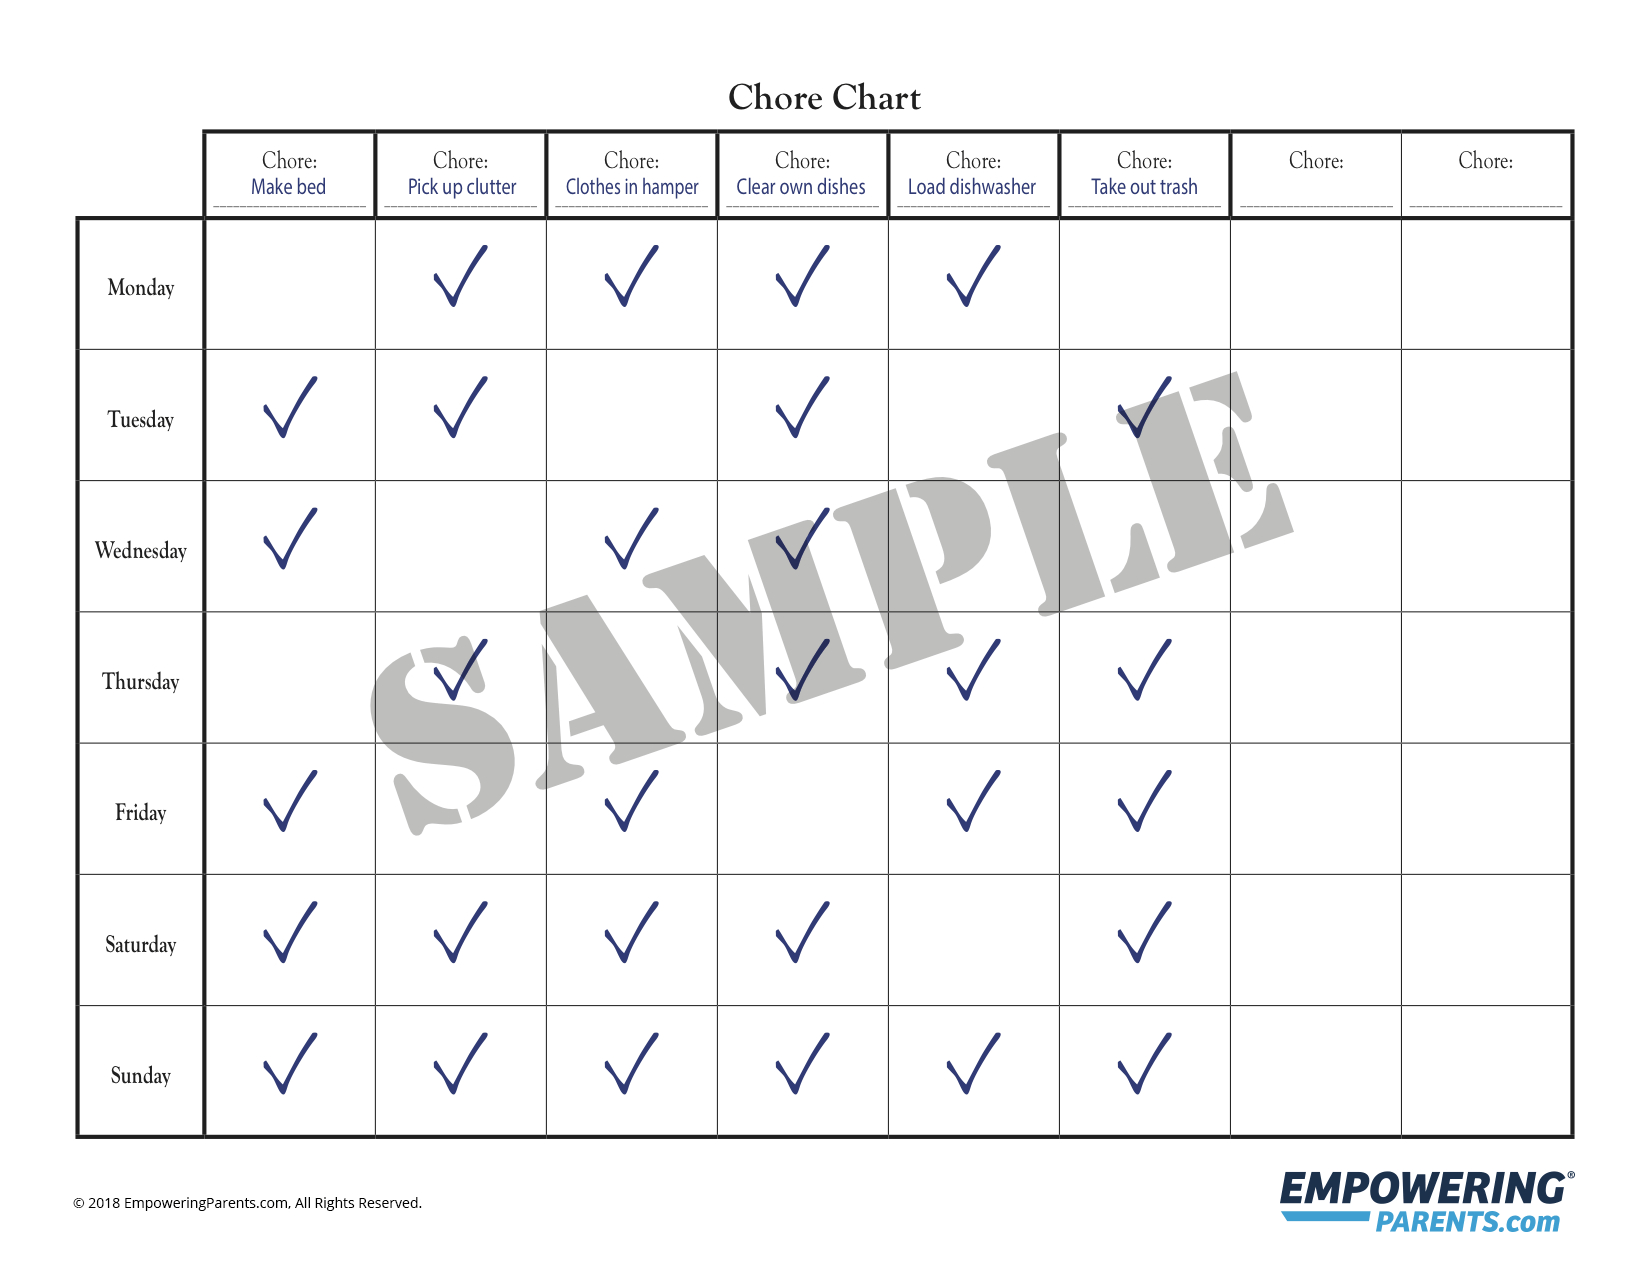 Chore Chart For Children -Behavior Chart For Home | Empowering Parents - Free Printable Chore Charts For Multiple Children